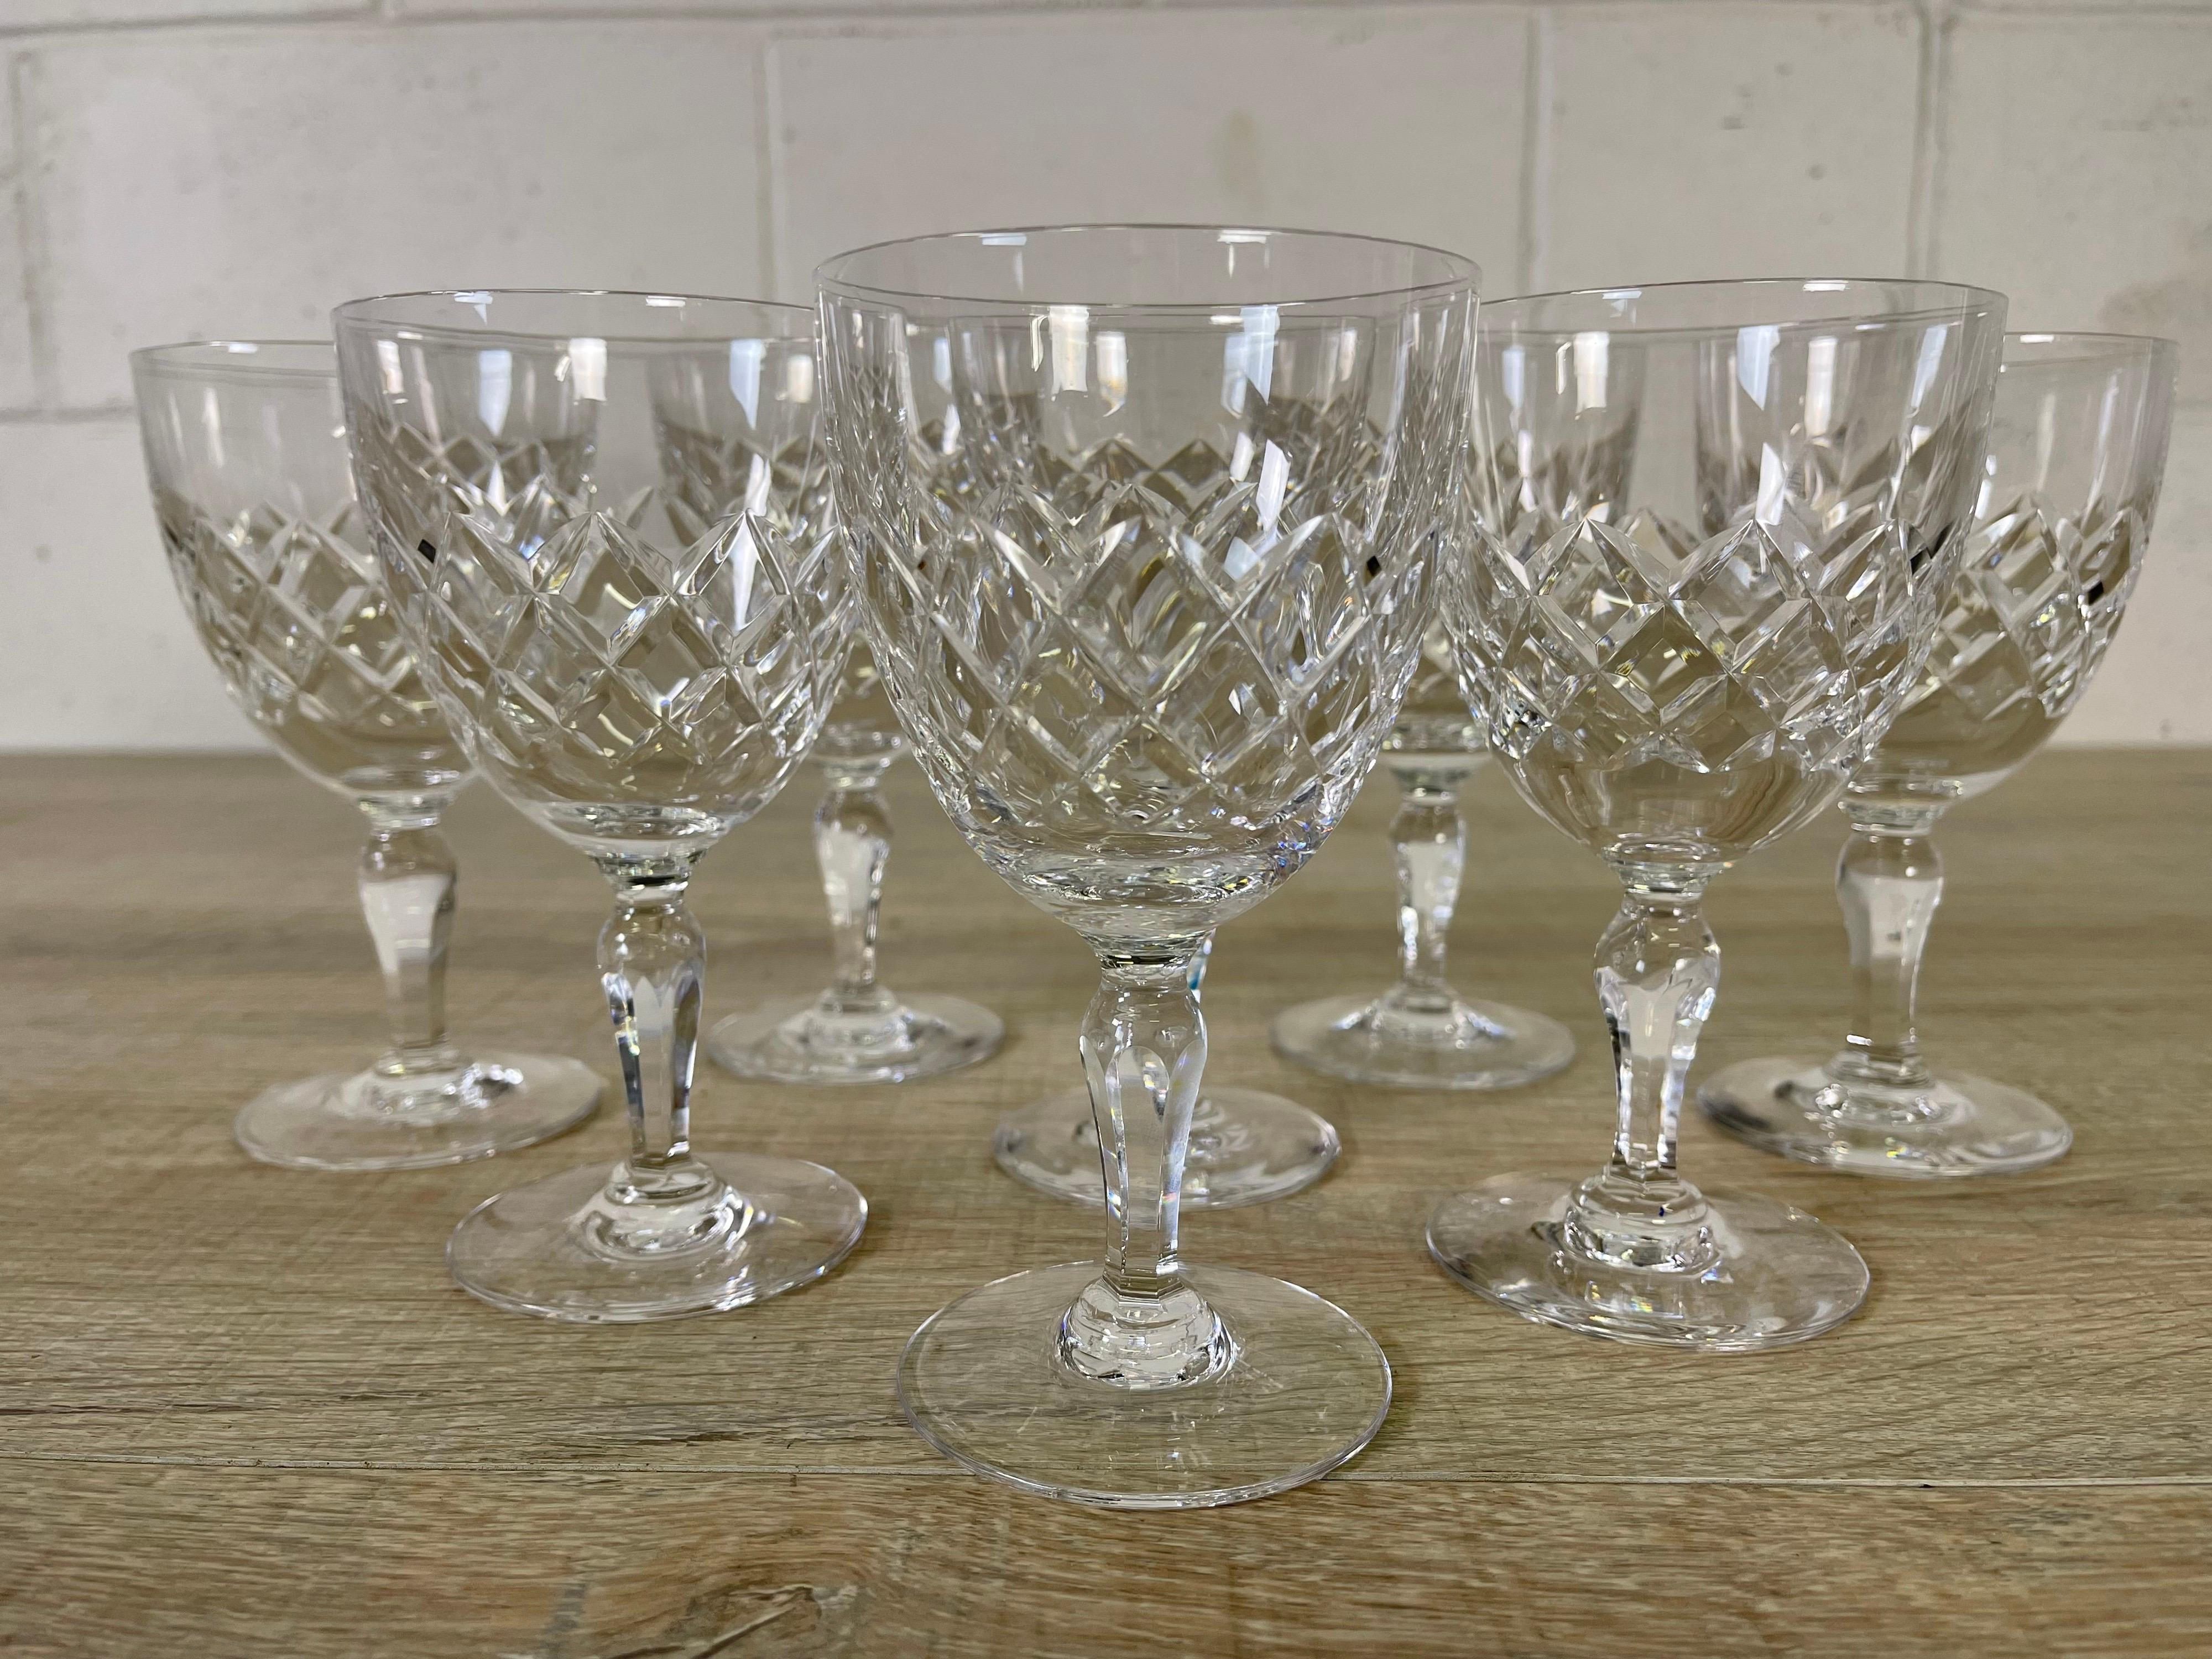 Vintage 1960s Orrefors Sweden set of 8 glass stems in the Karolina pattern. Beautiful crystal glass that has been handblown. Marked underneath.